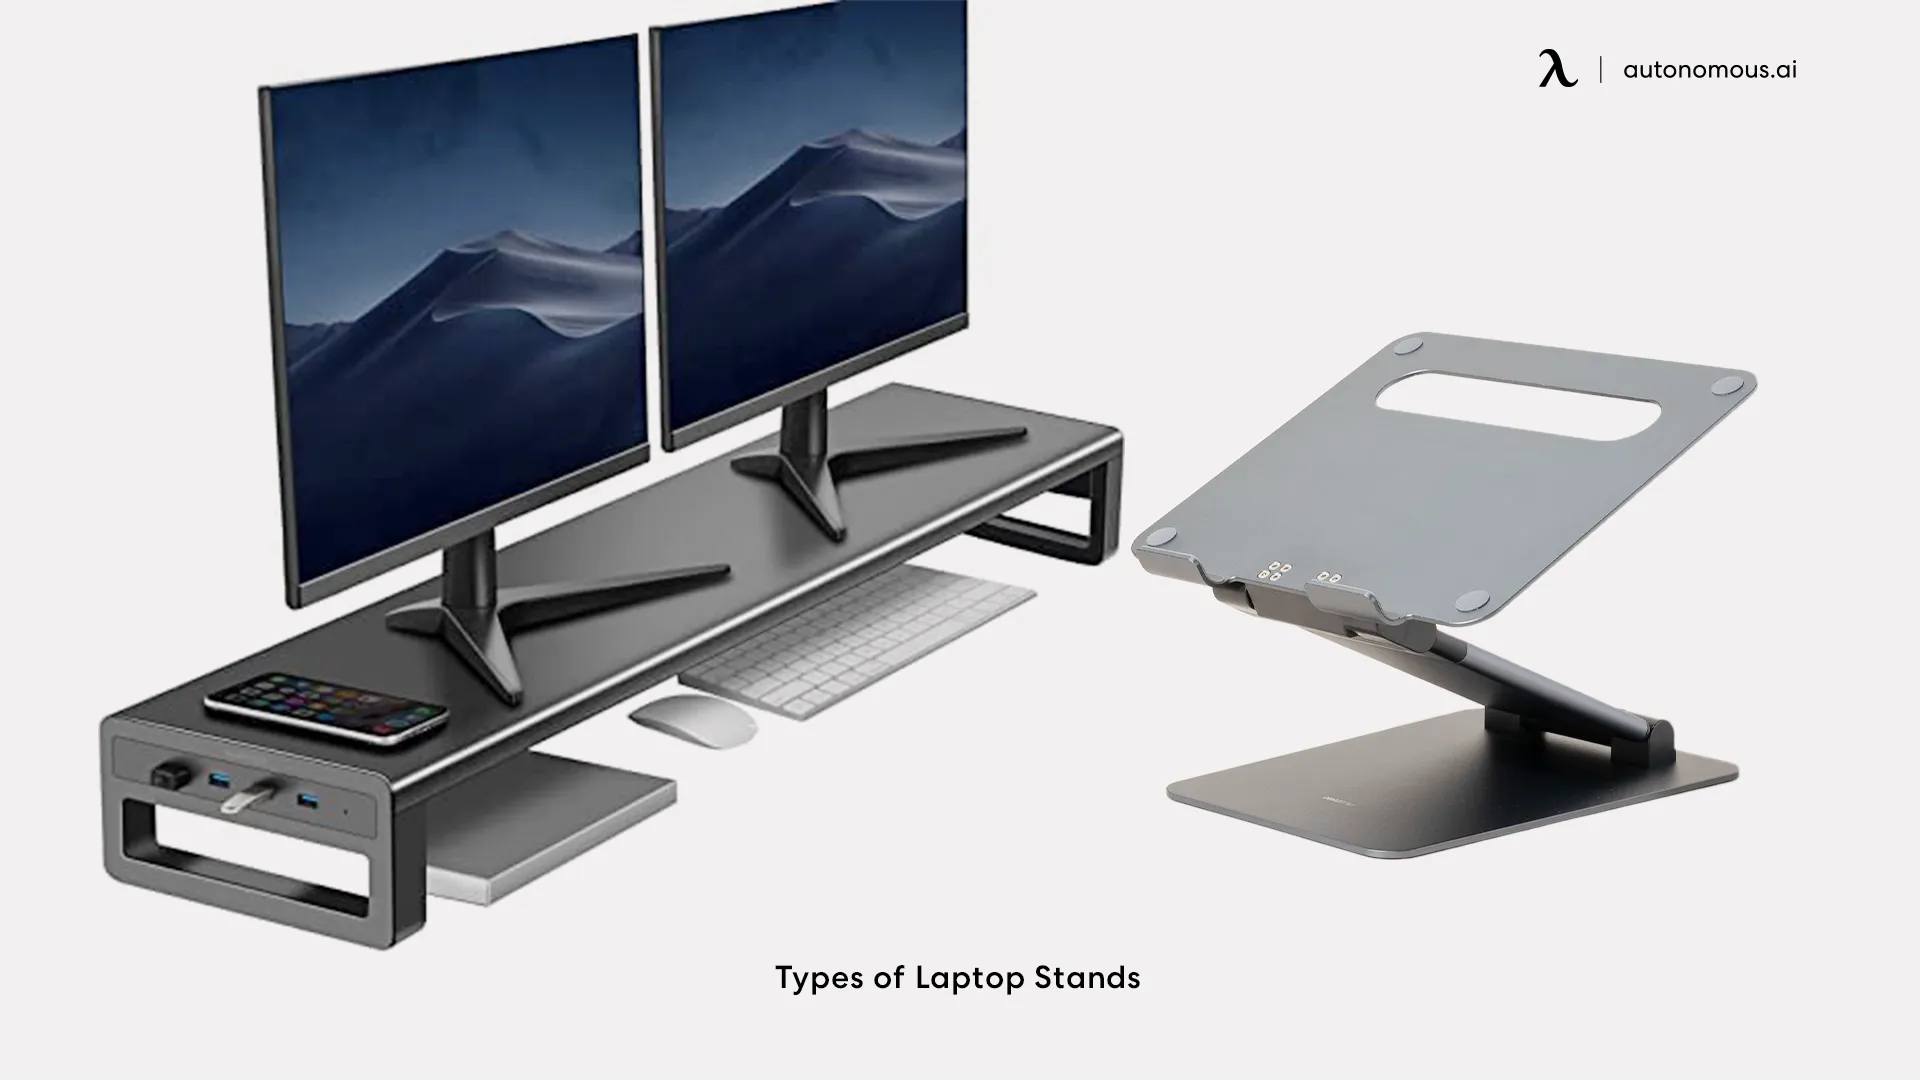 Types of Laptop Stands